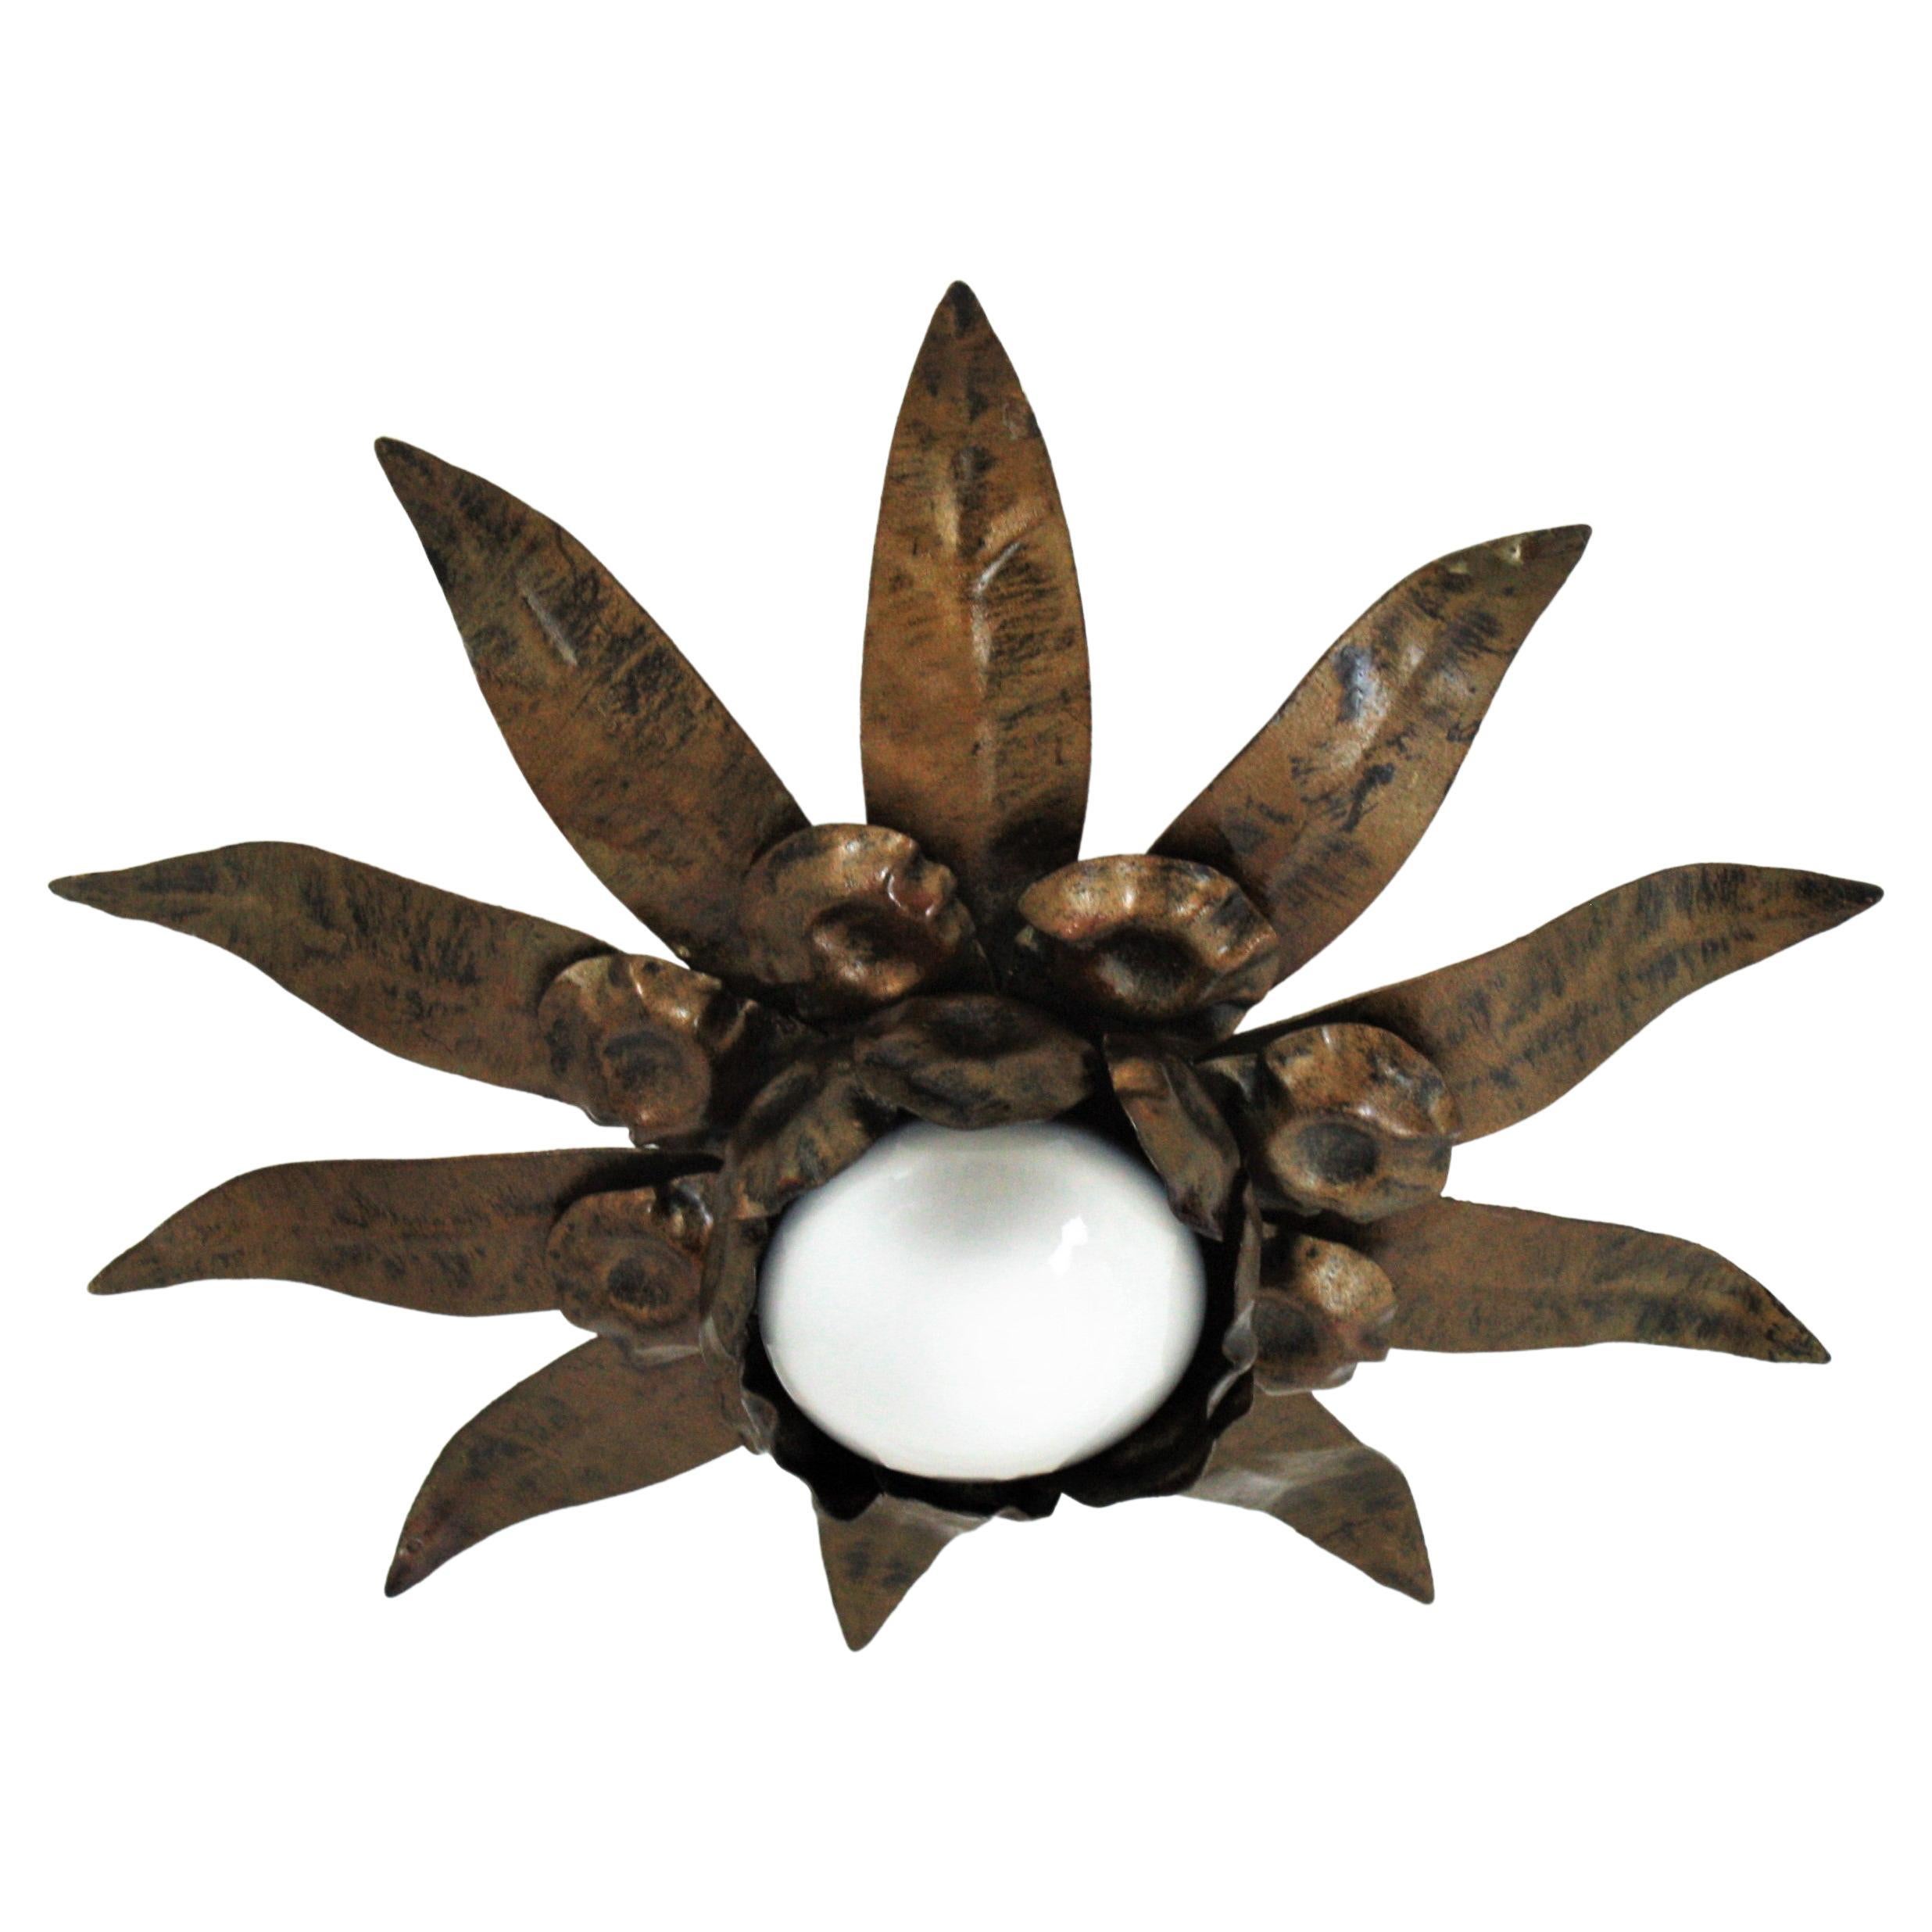 Flower Sunburst Flush Mount, Gilt Iron. Spain, 1960s.
This ceiling light features a flower shaped frame with three layers of leaves in different sizes surrounding a central exposed bulb. Patinated in bronze gilt color.
This sunburst light fixture